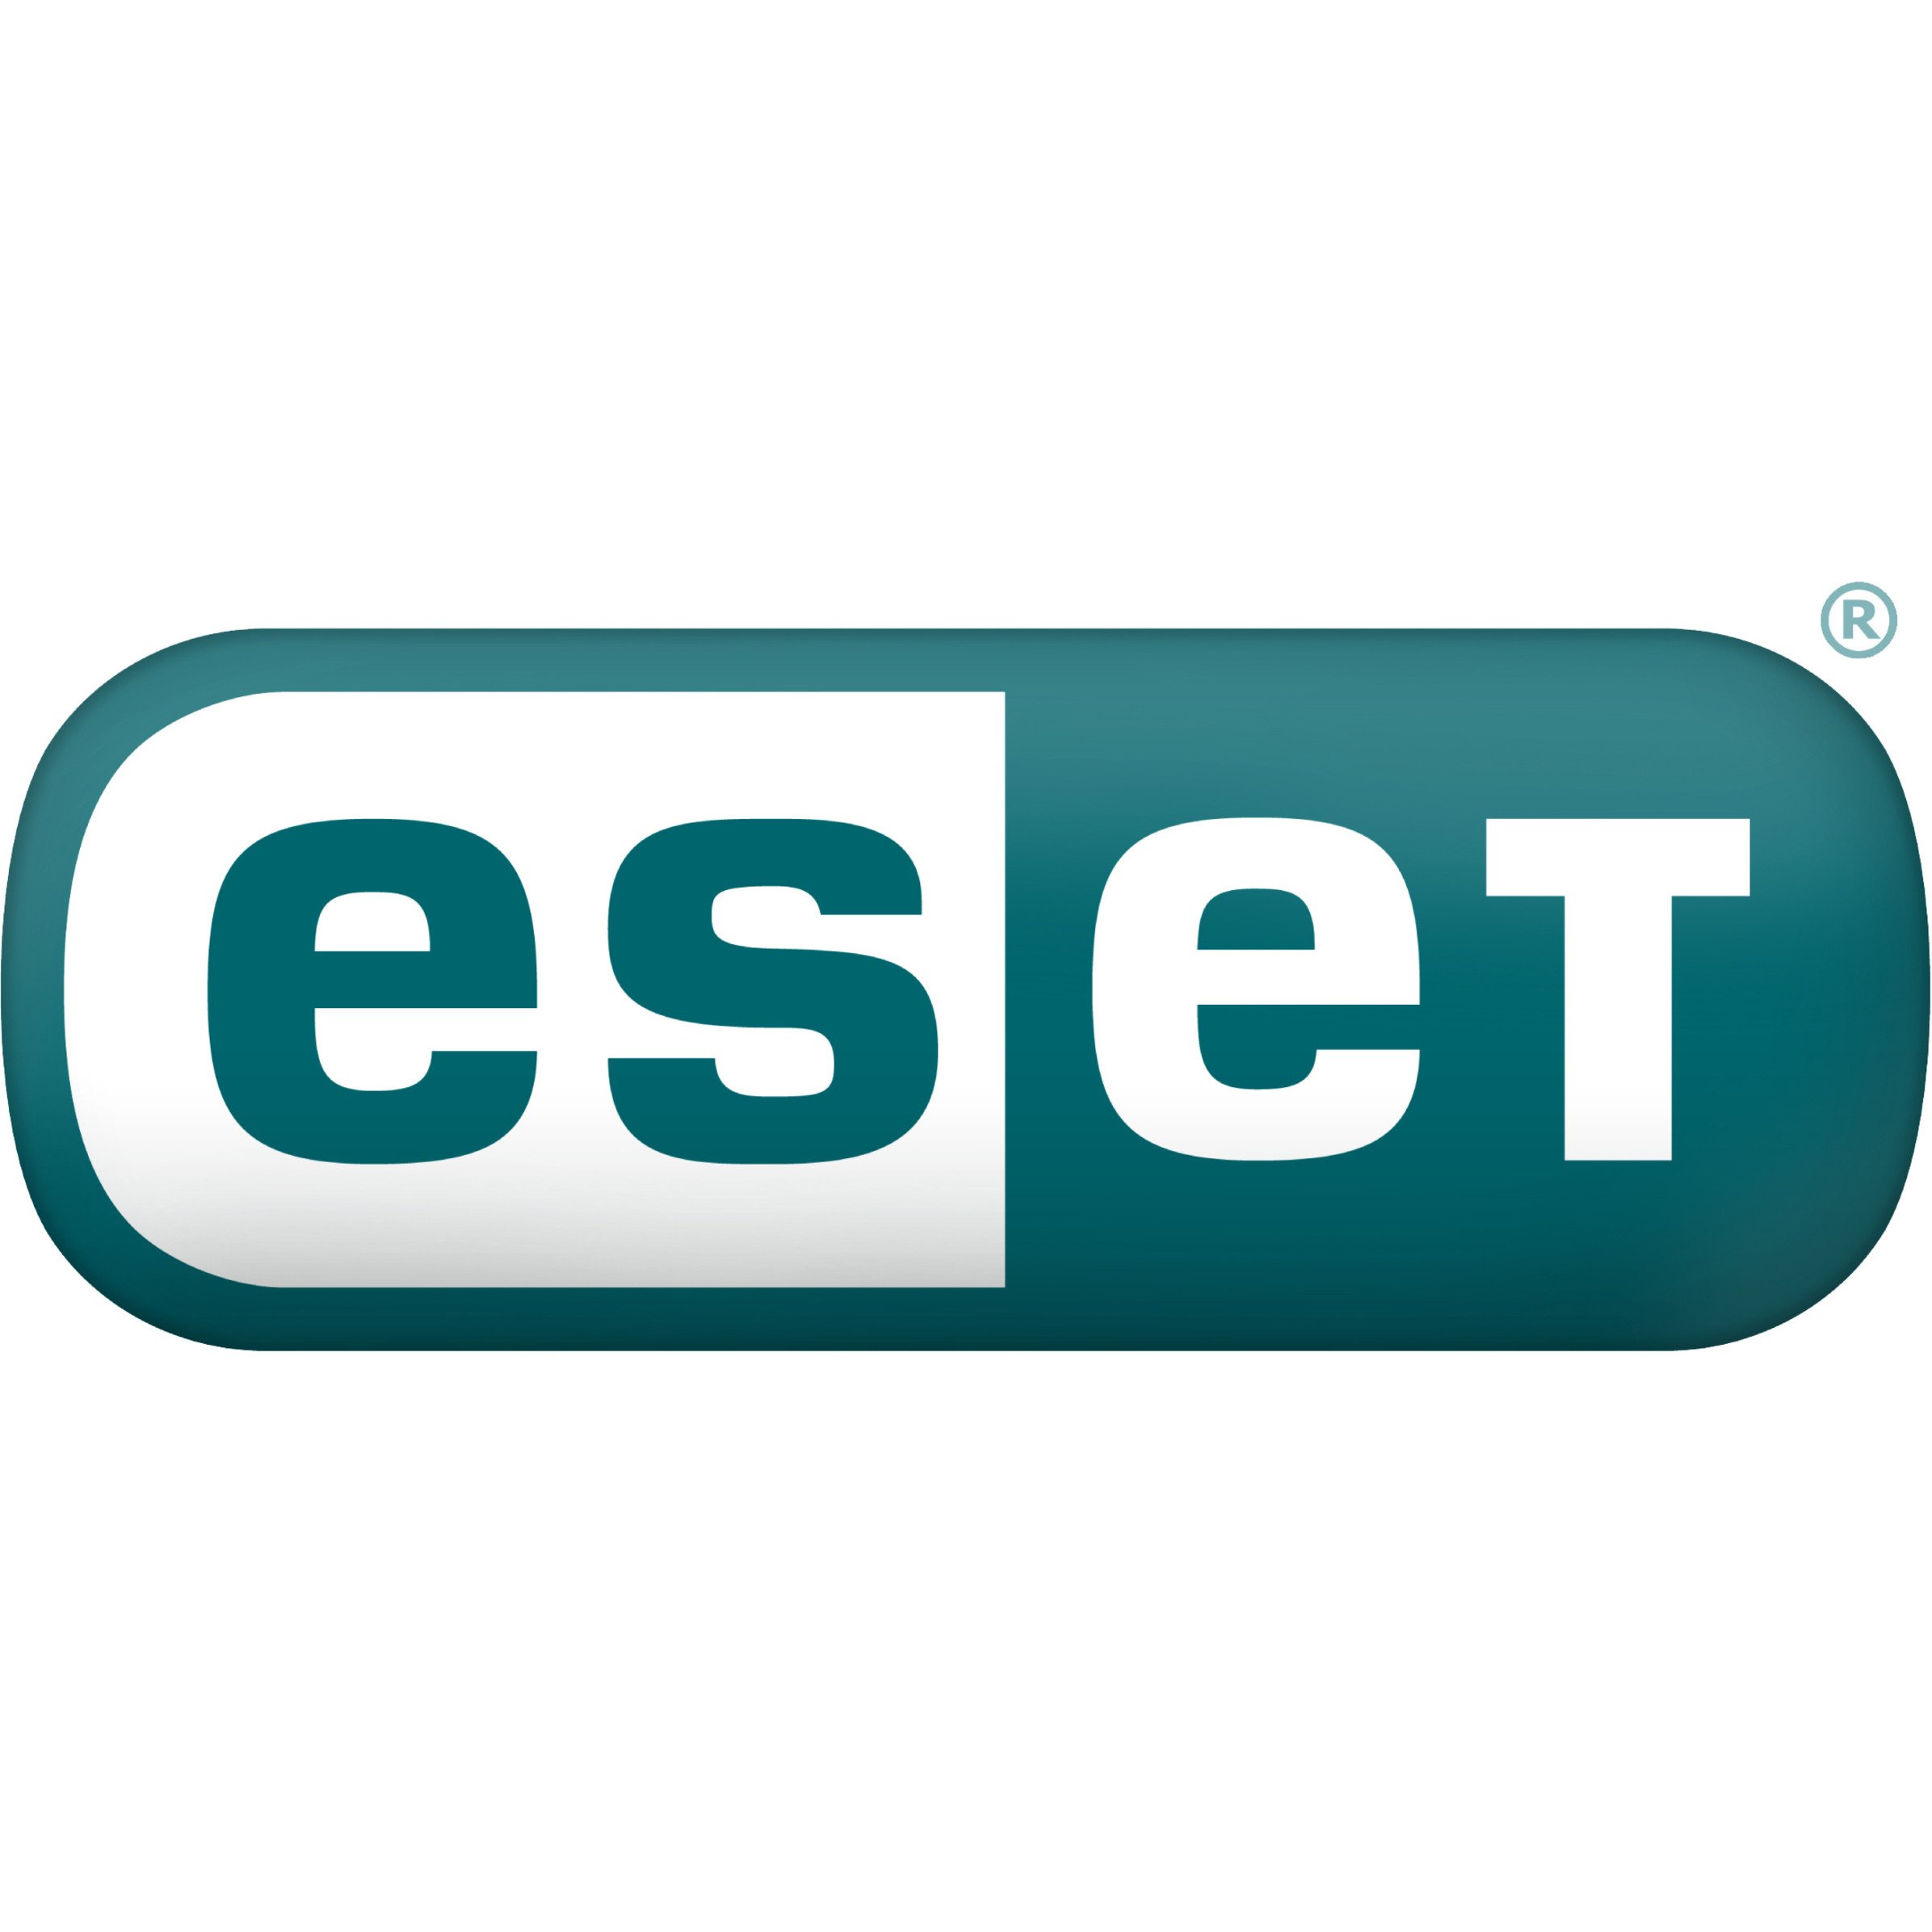 ESET PROTECT CompleteSubscription License5 DevicePC, Mac, Handheld